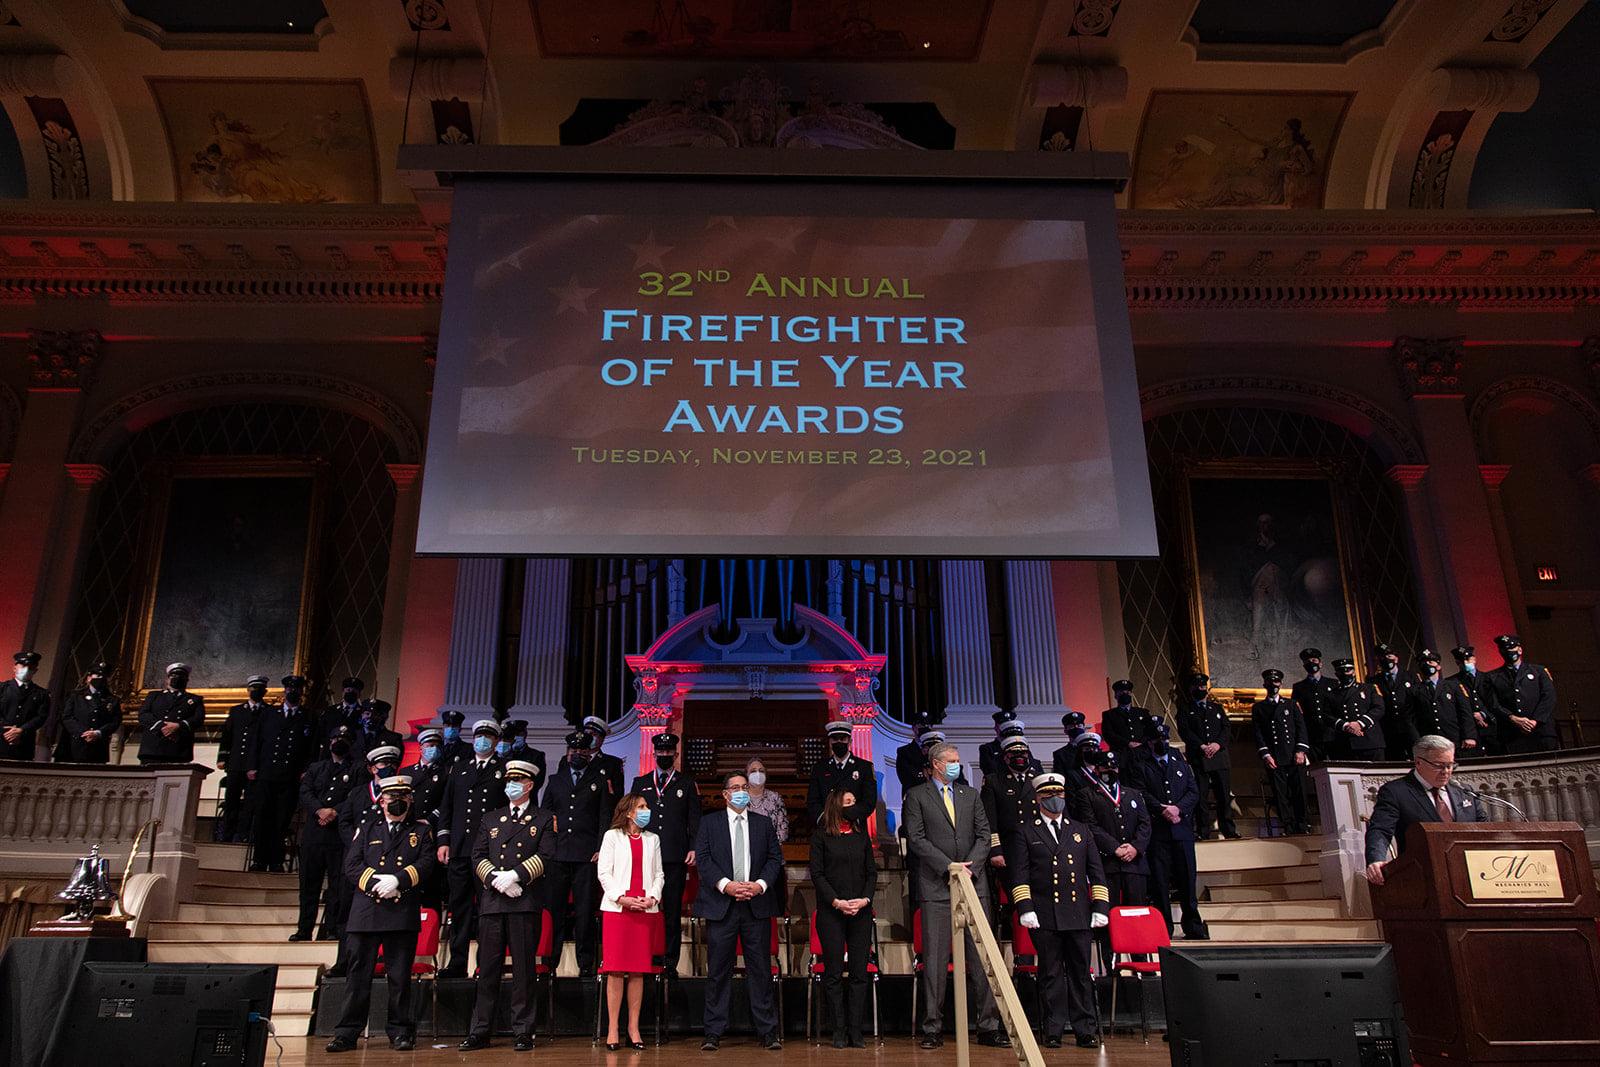 Firefighters and public officials at an award ceremony